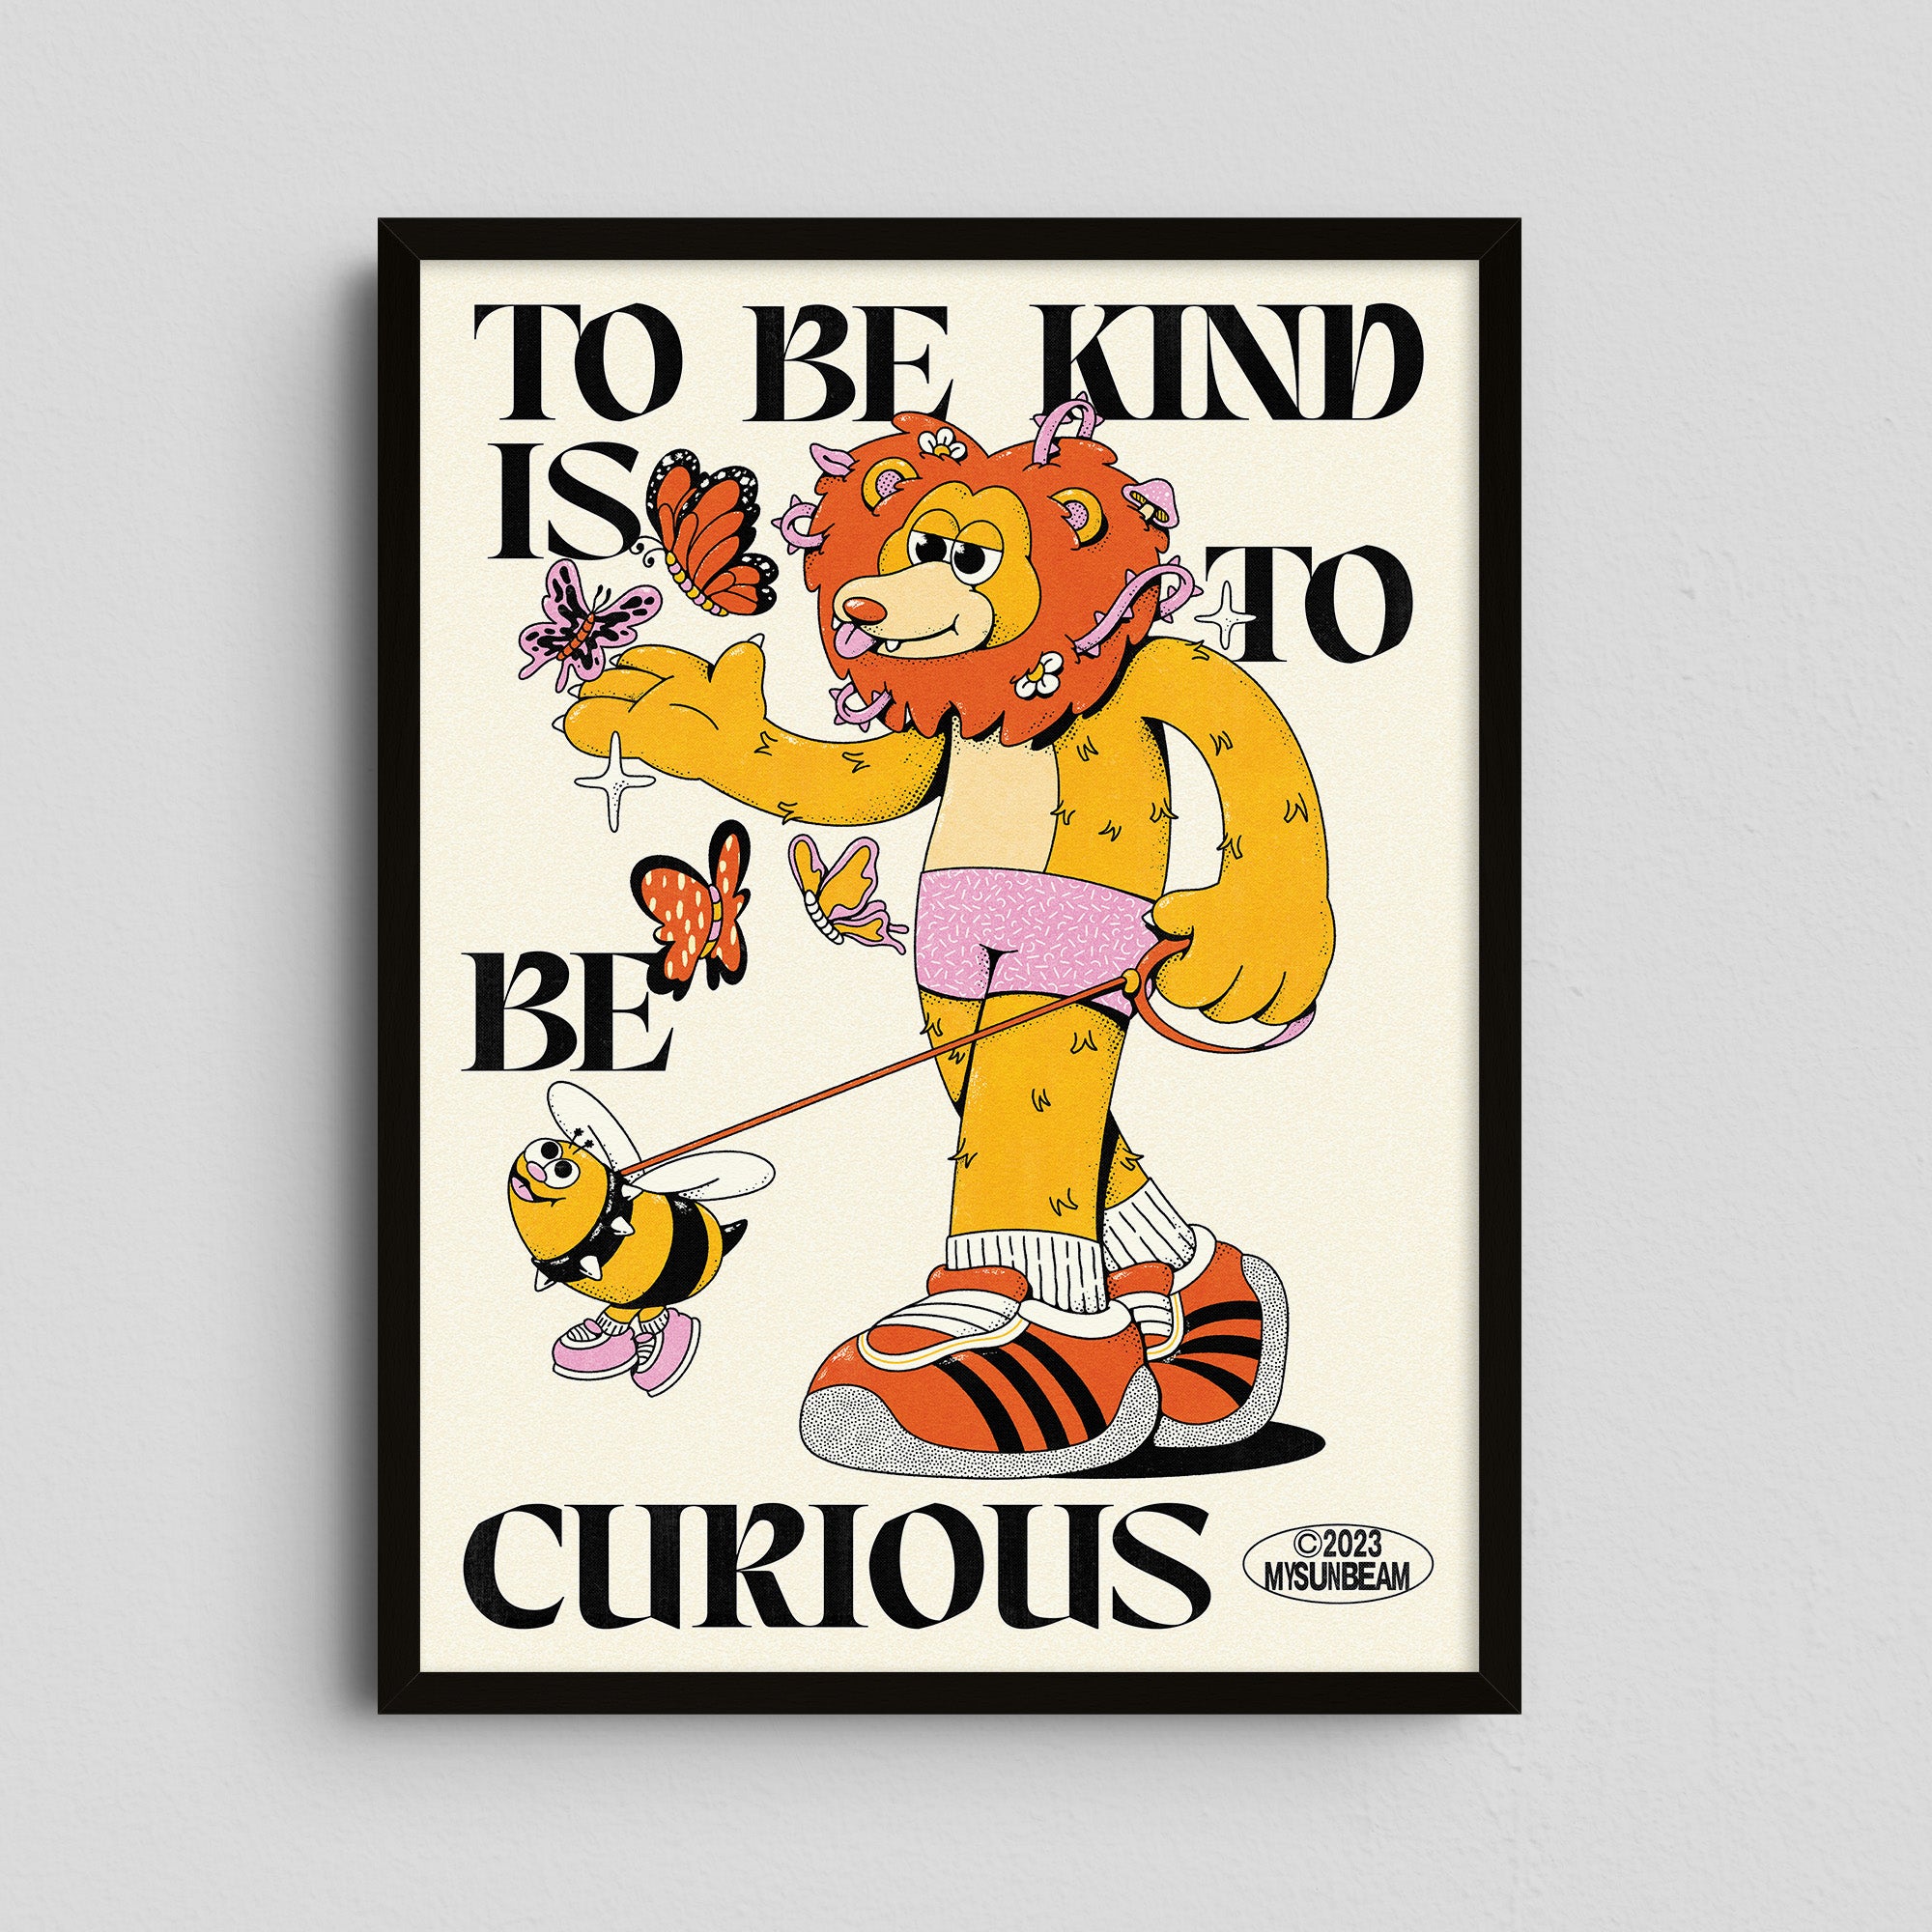 To Be Kind Is To Be Curious - My Sunbeam